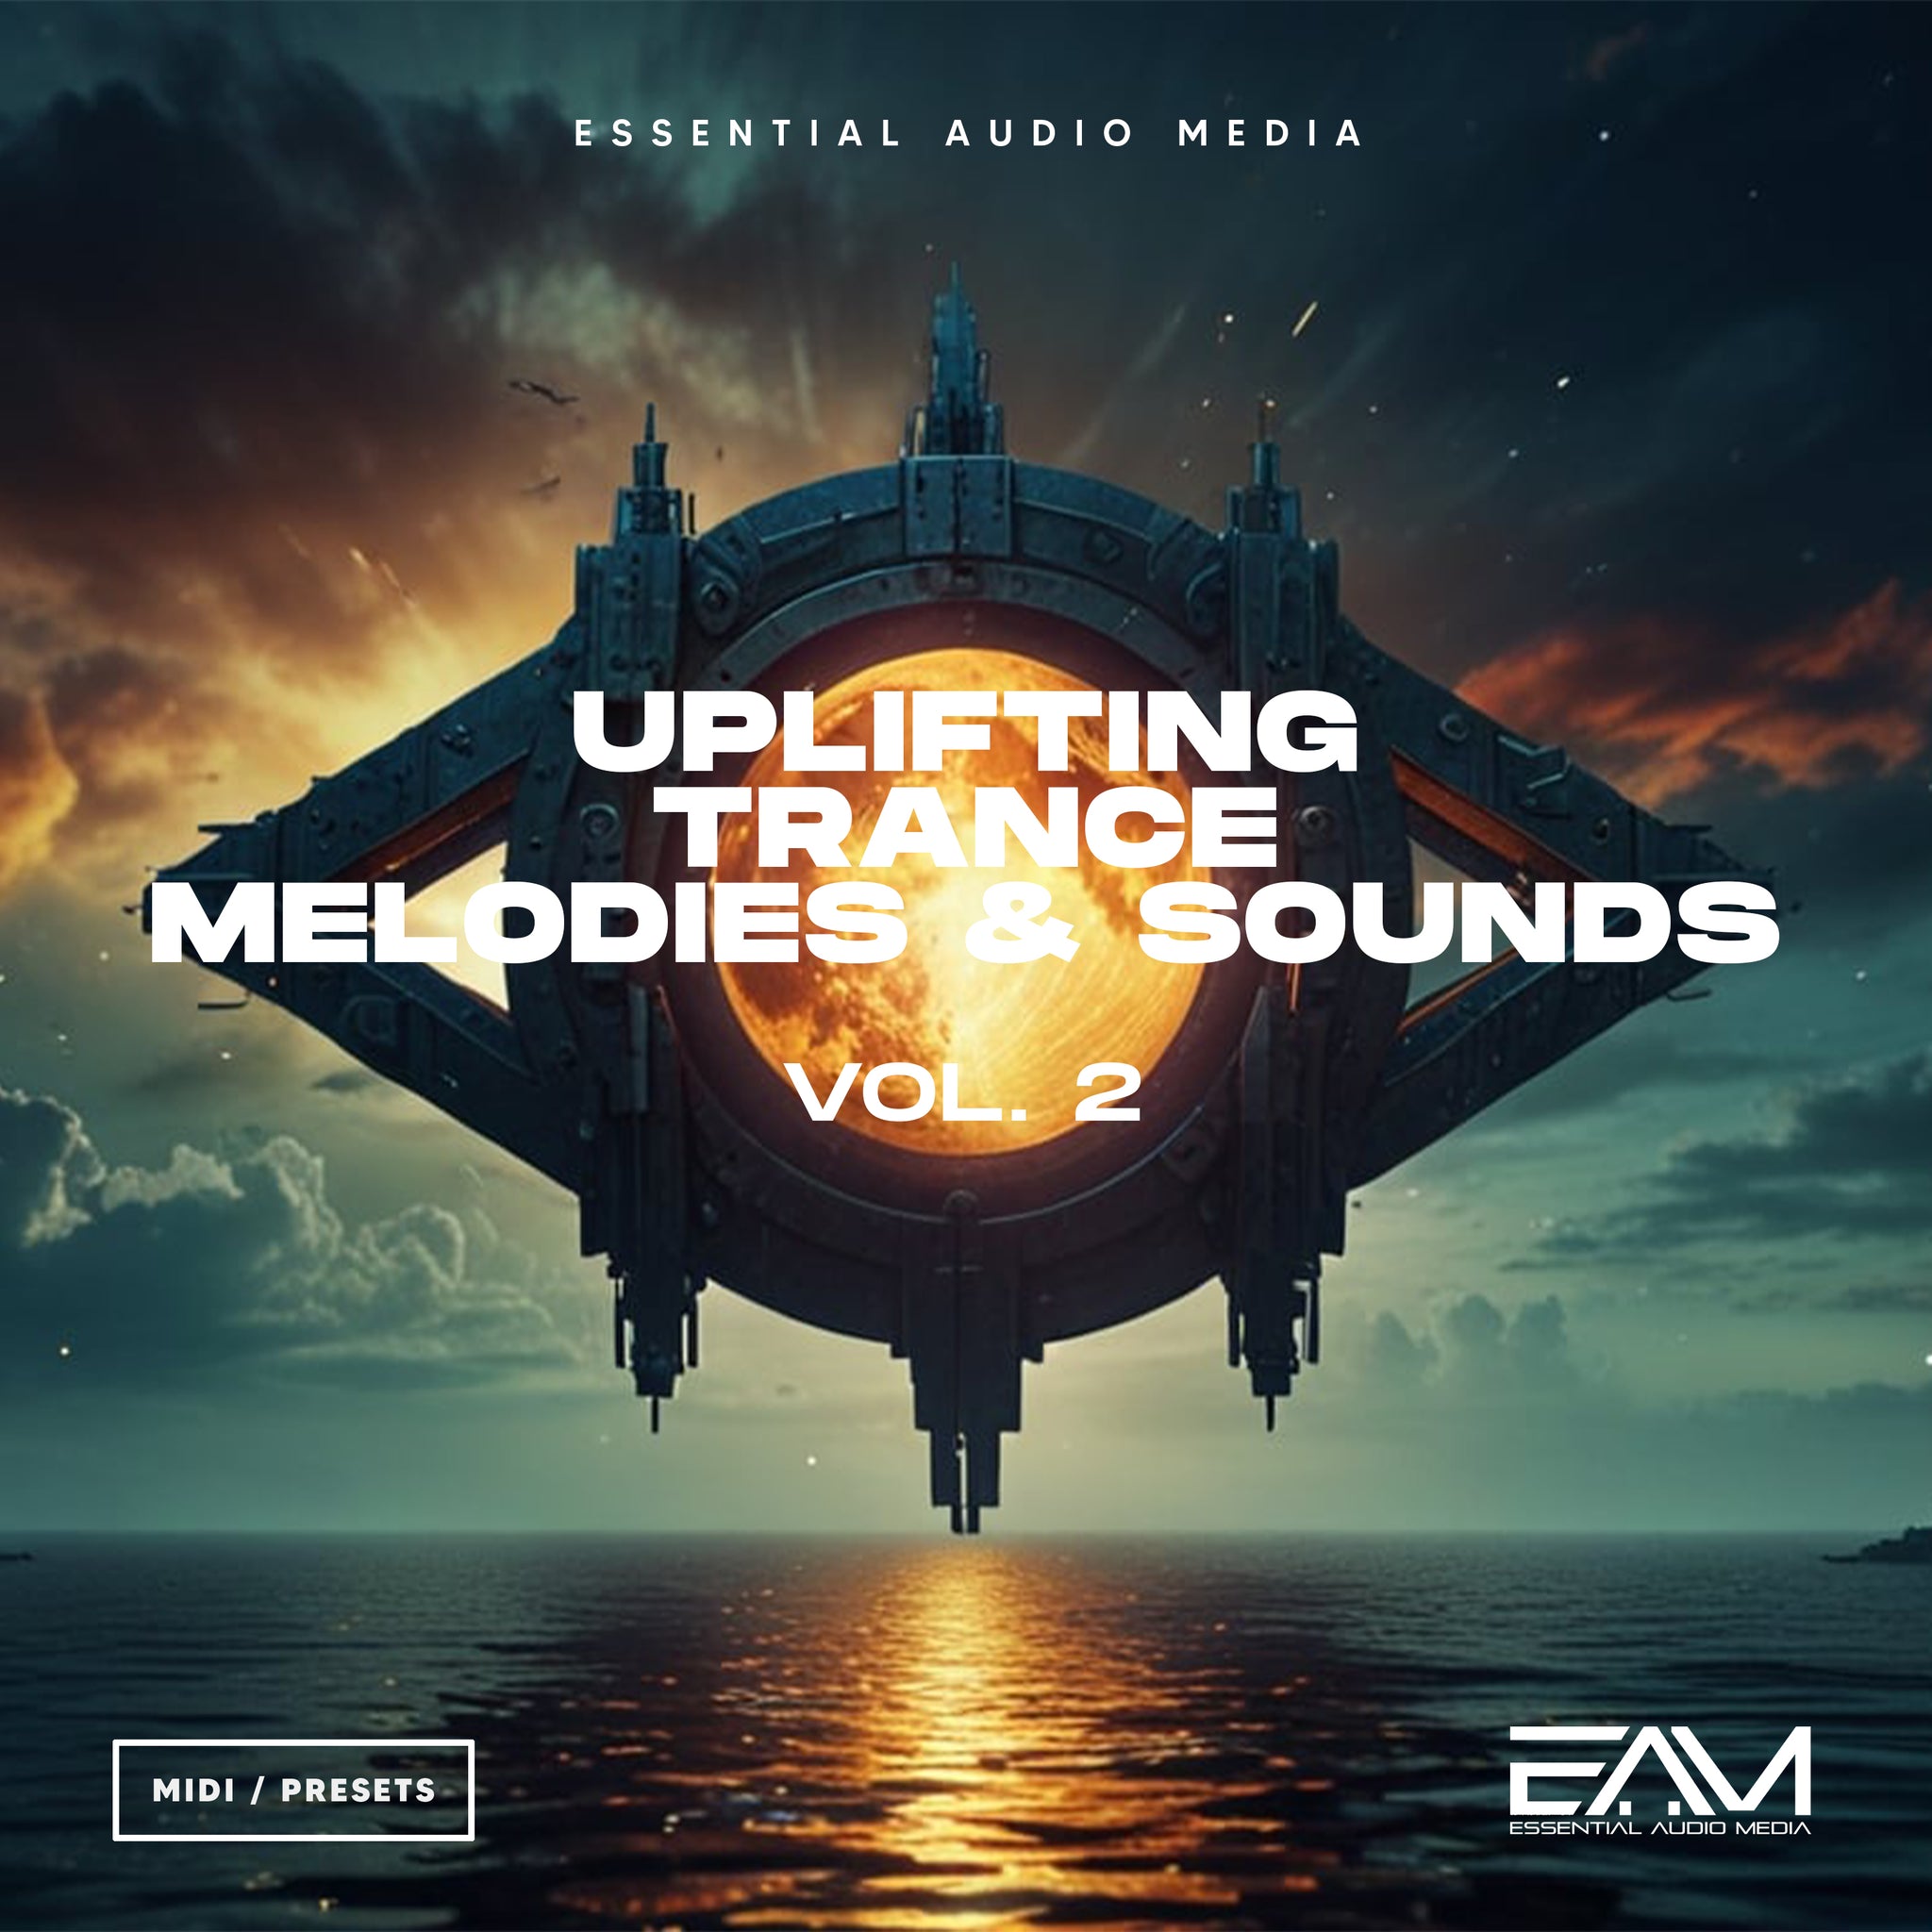 Uplifting Trance Melodies & Sounds Vol.2